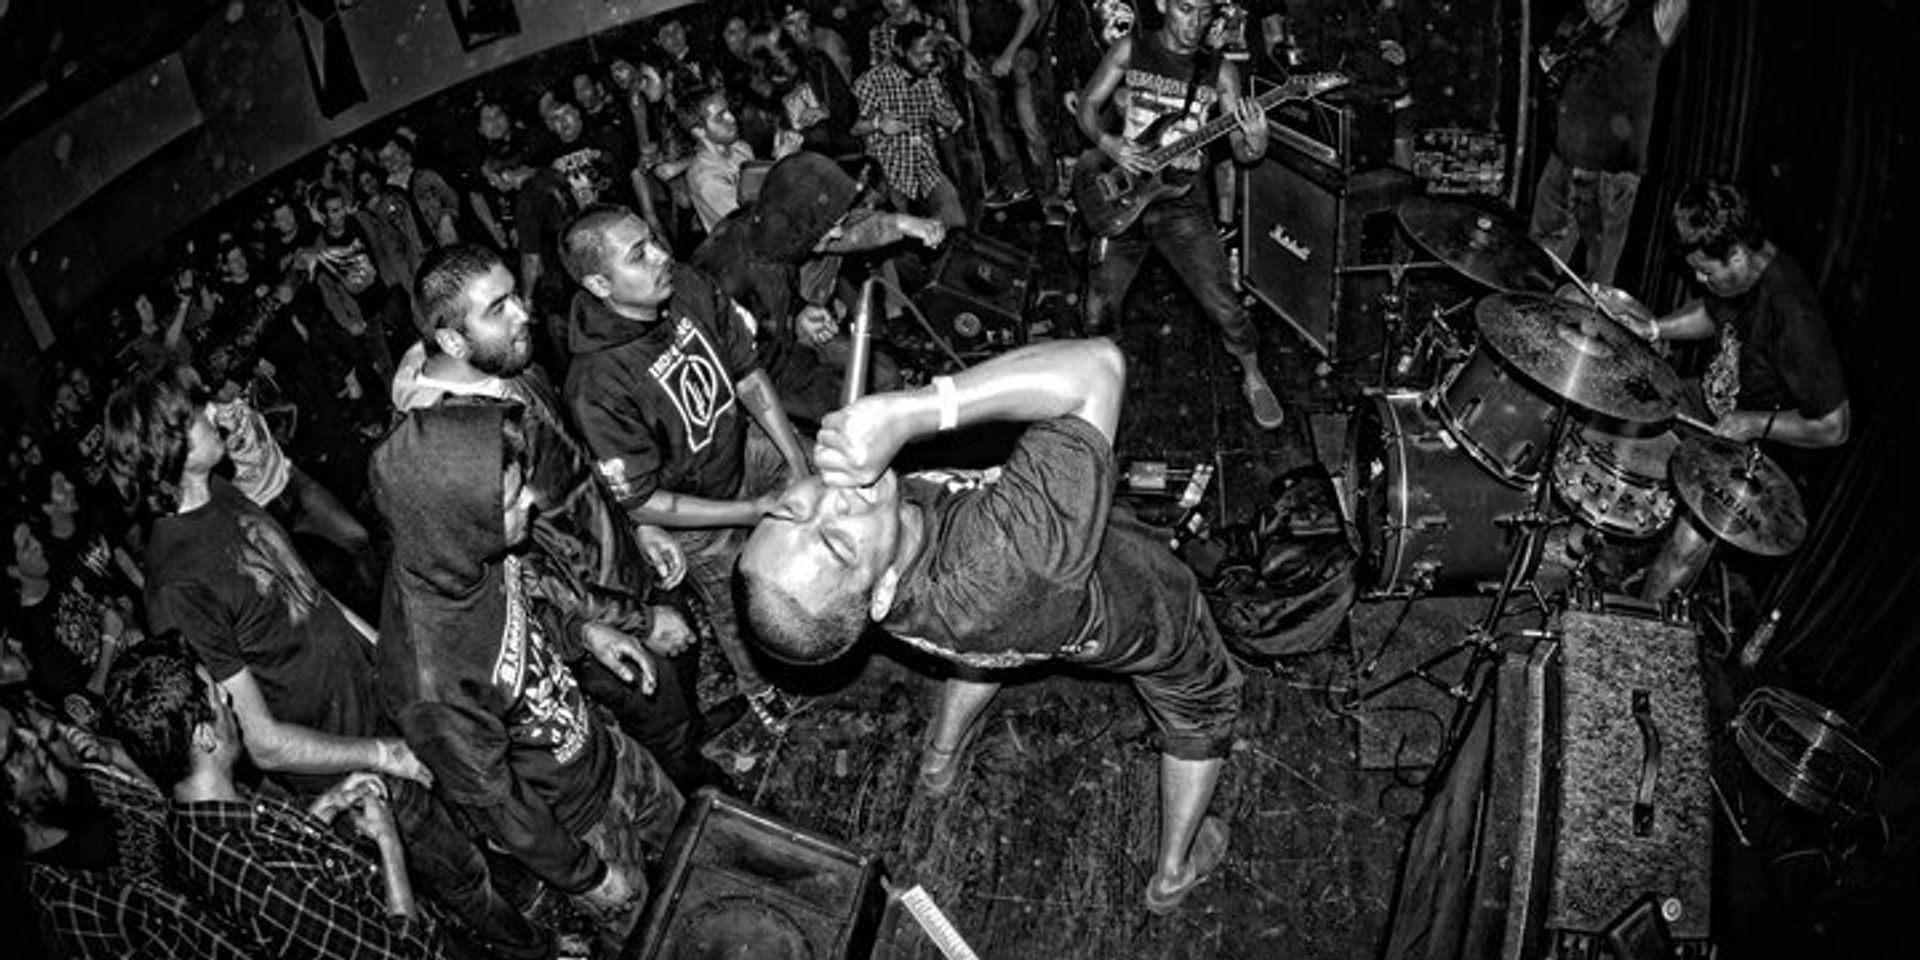 Grindcore: The real guide to music you want to break stuff to